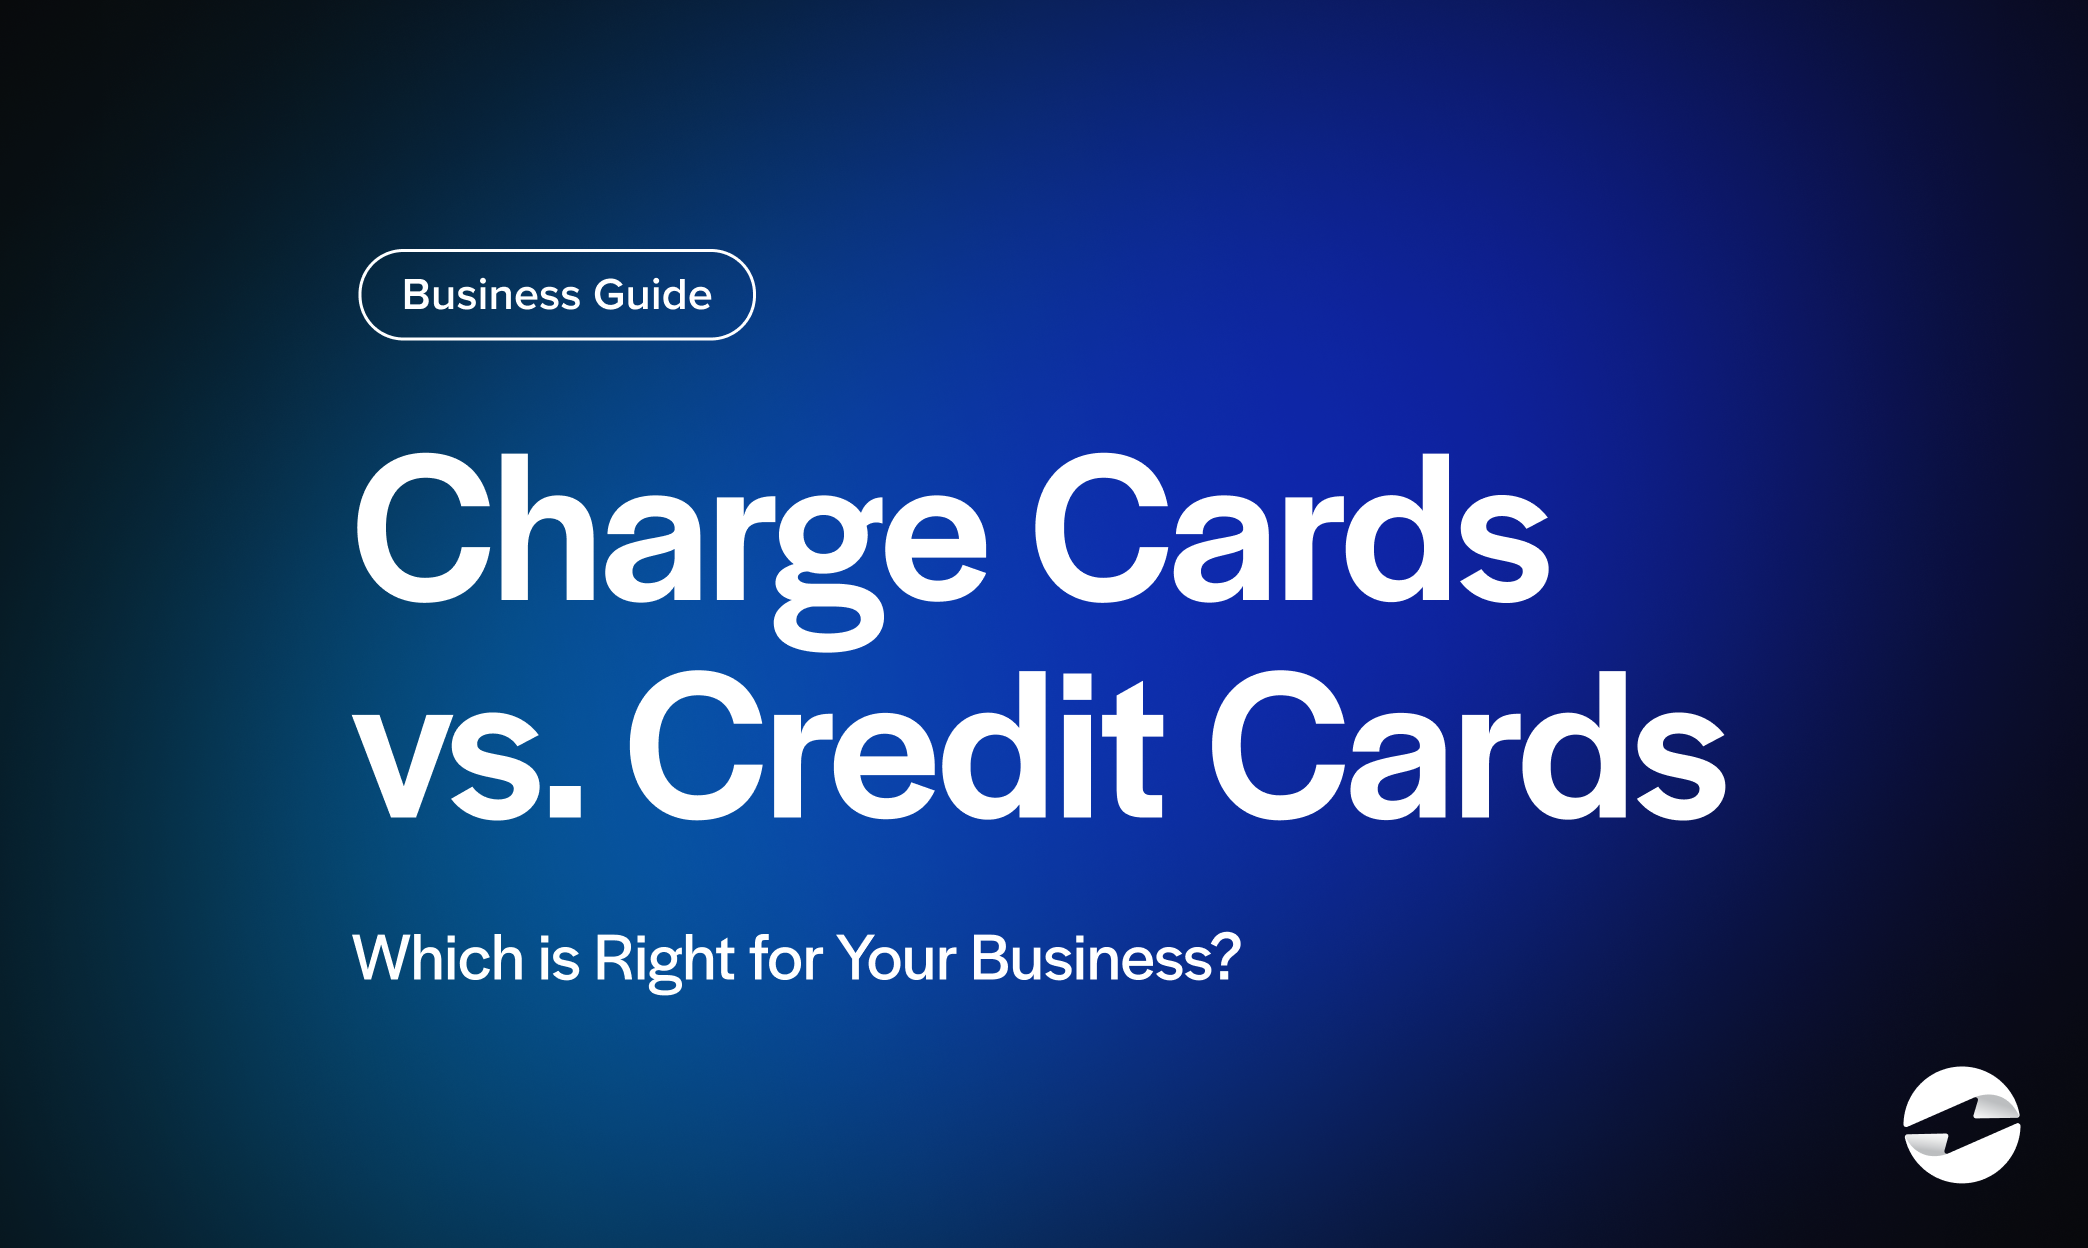 Charge Cards vs. Credit Cards: Which is Right for Your Business?